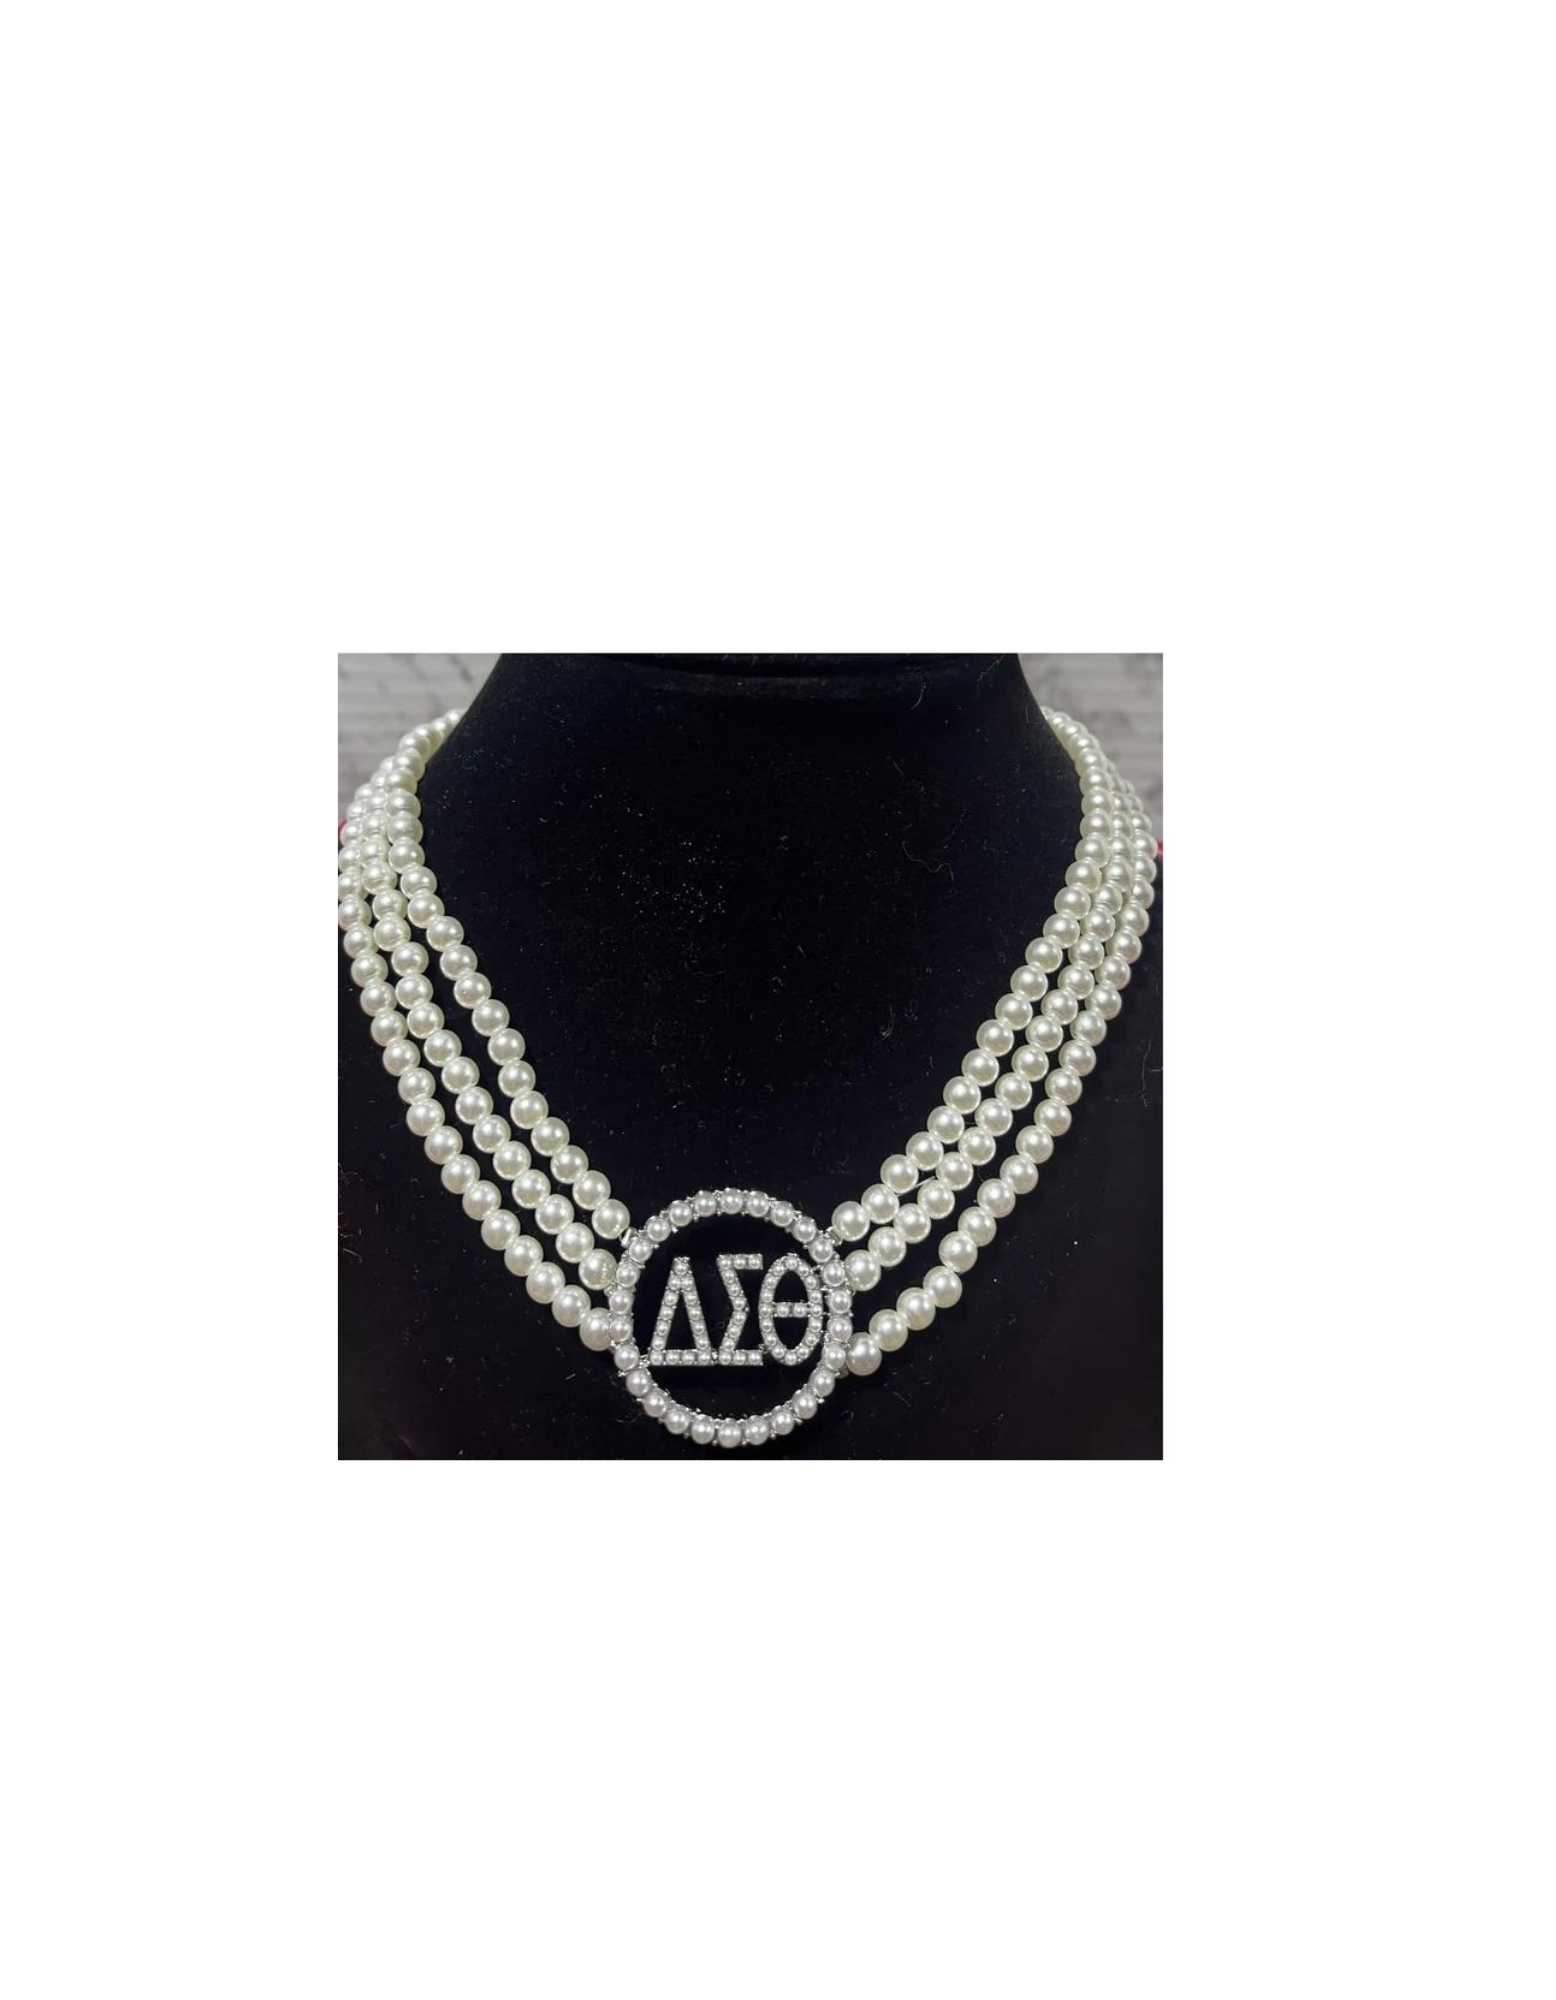 3 Strand Pearl Necklace with DST Greek Symbols.